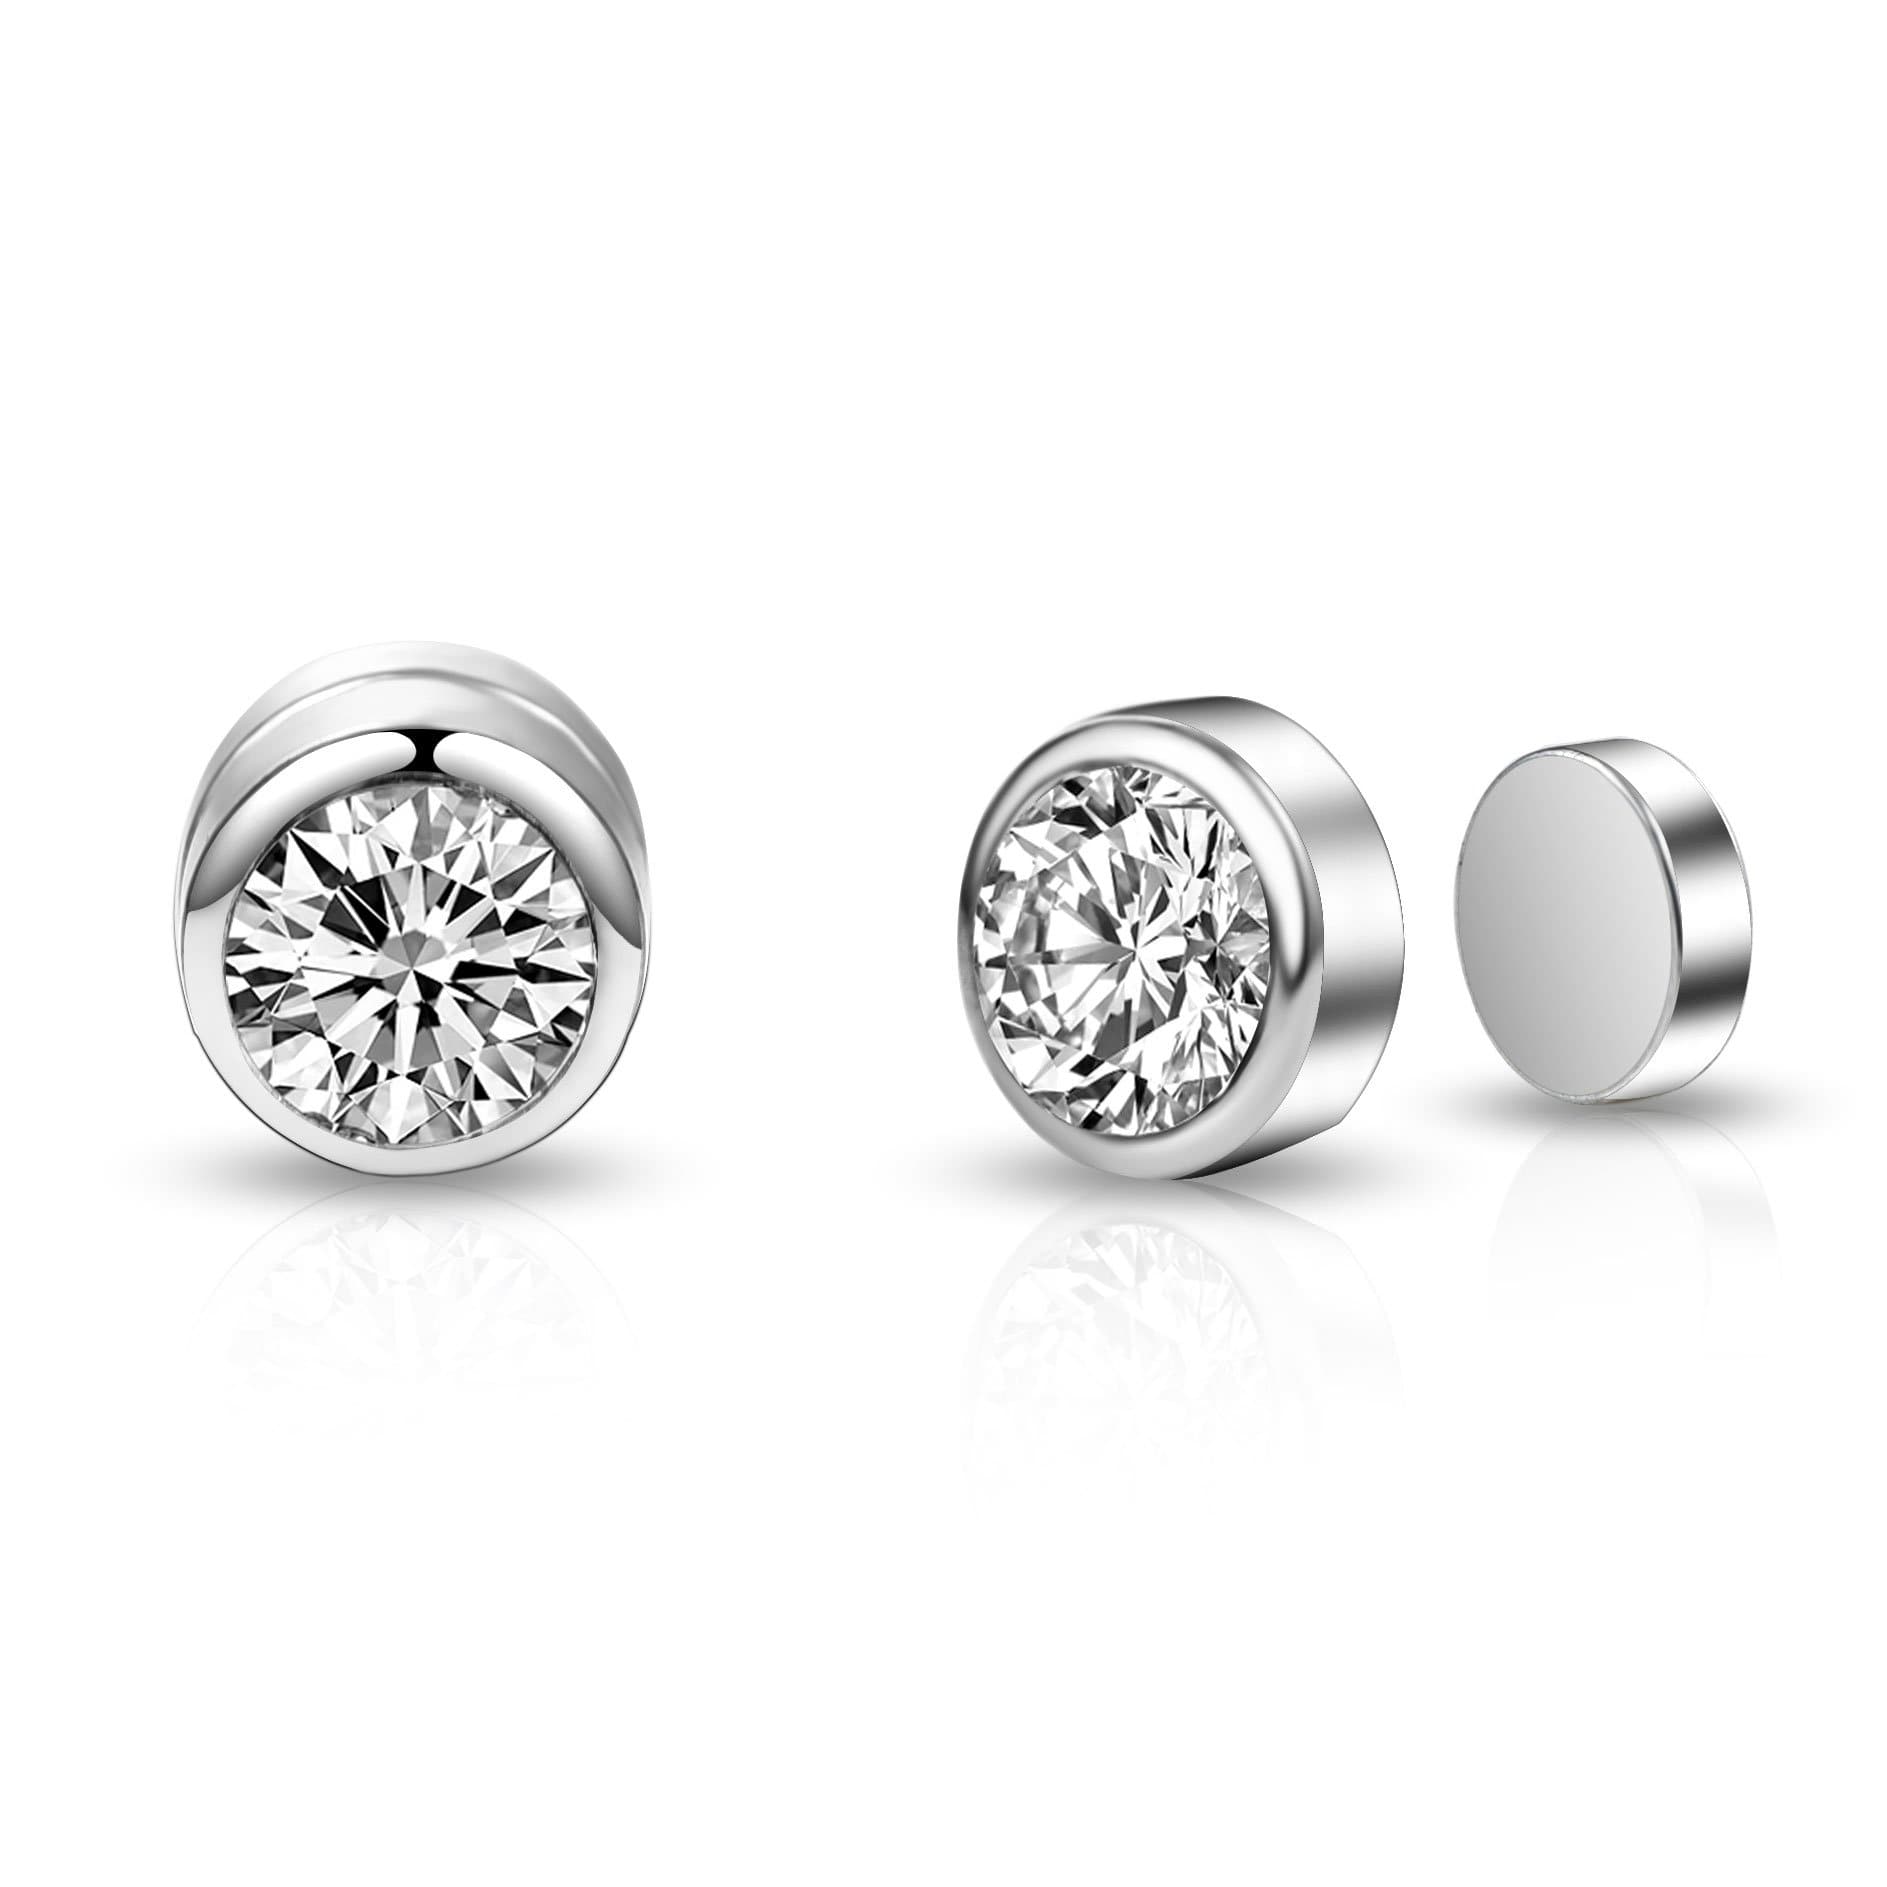 Men's Silver Plated 6mm Magnetic Clip On Earrings Created with Zircondia® Crystals by Philip Jones Jewellery